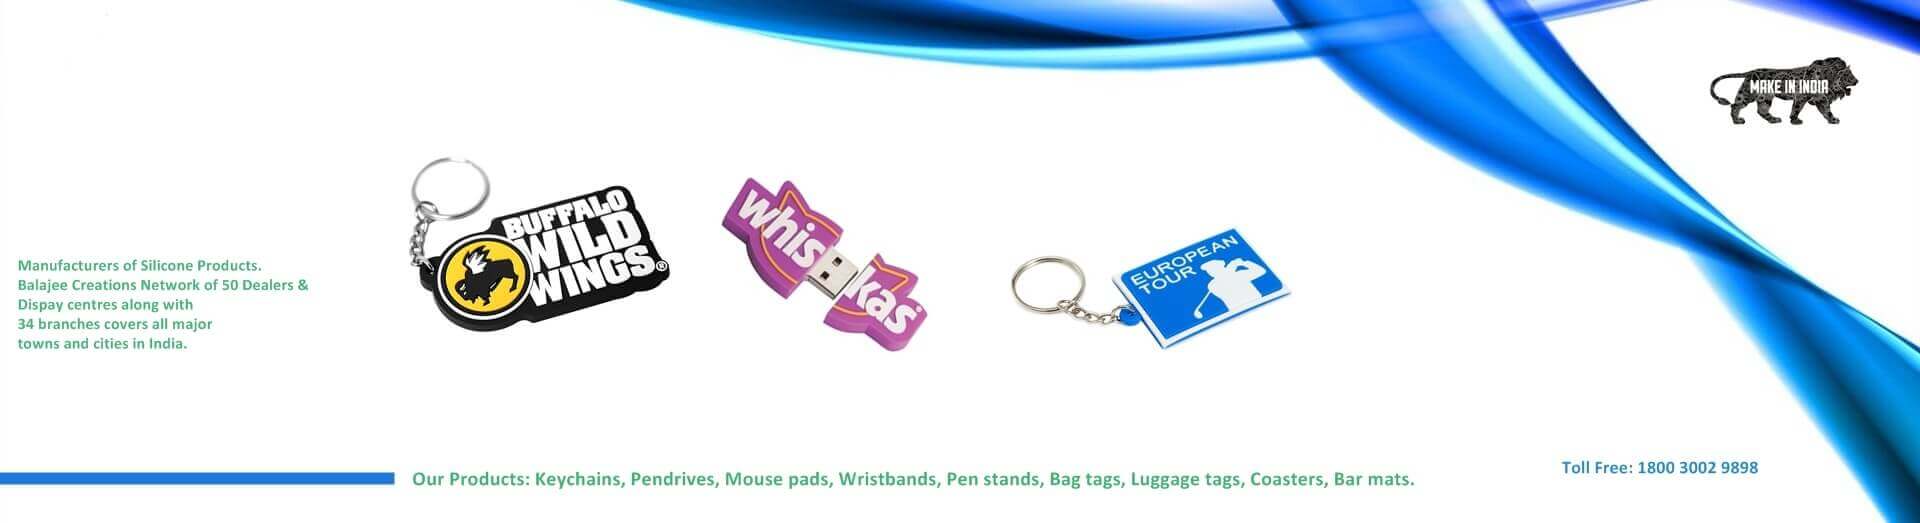 Rubber Keychain Manufacturer in Ludhiana,Keychain in Ludhiana,Keychain Manufacturer in Banglore,Promotional Keychain in Ludhiana,Customized Keychain in Banglore,Keychain Wholesaler in Ludhiana 